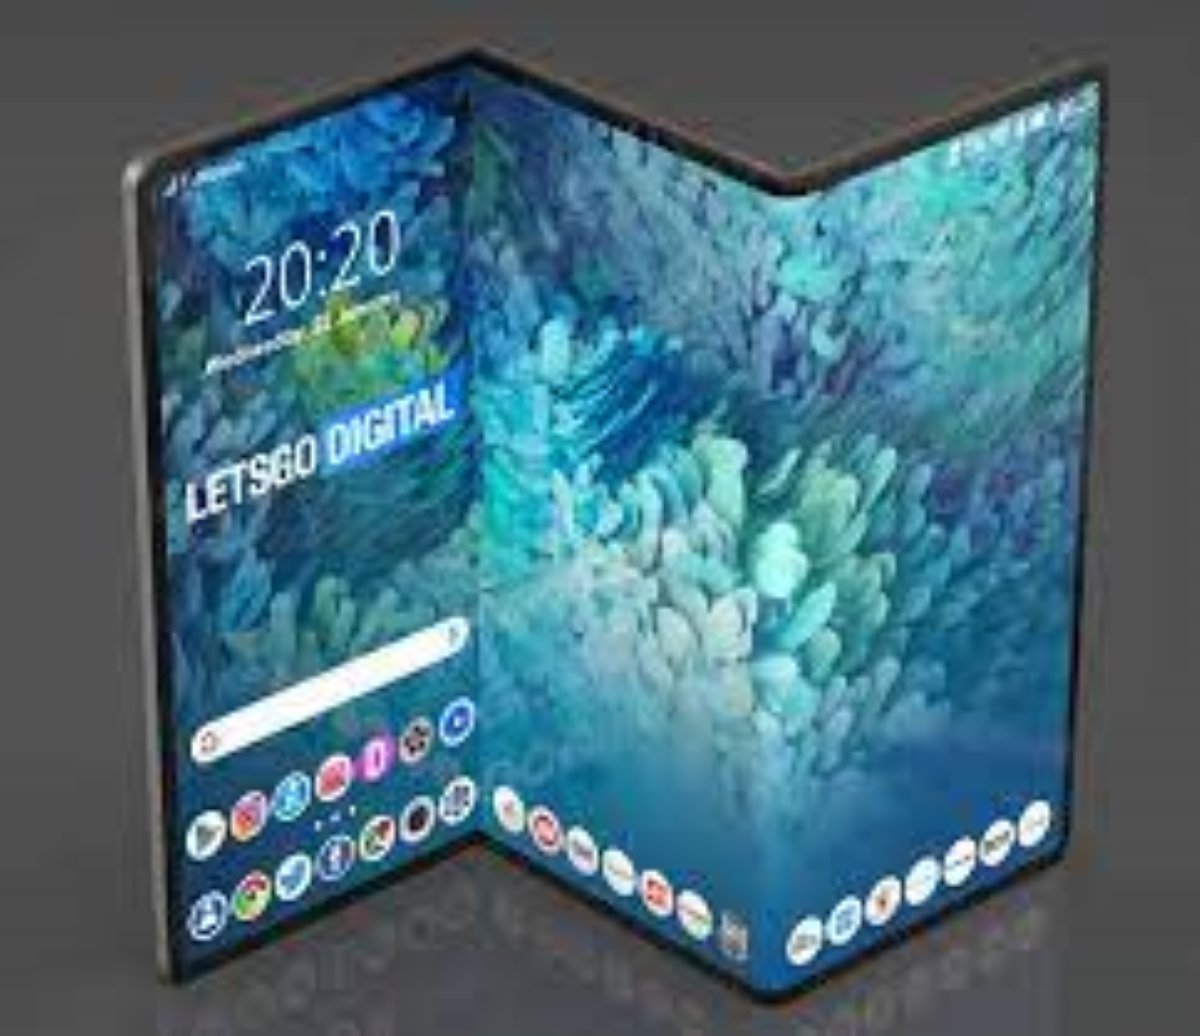 Samsung registers Galaxy Z Fold brand as foldable tablet | DroidAfrica